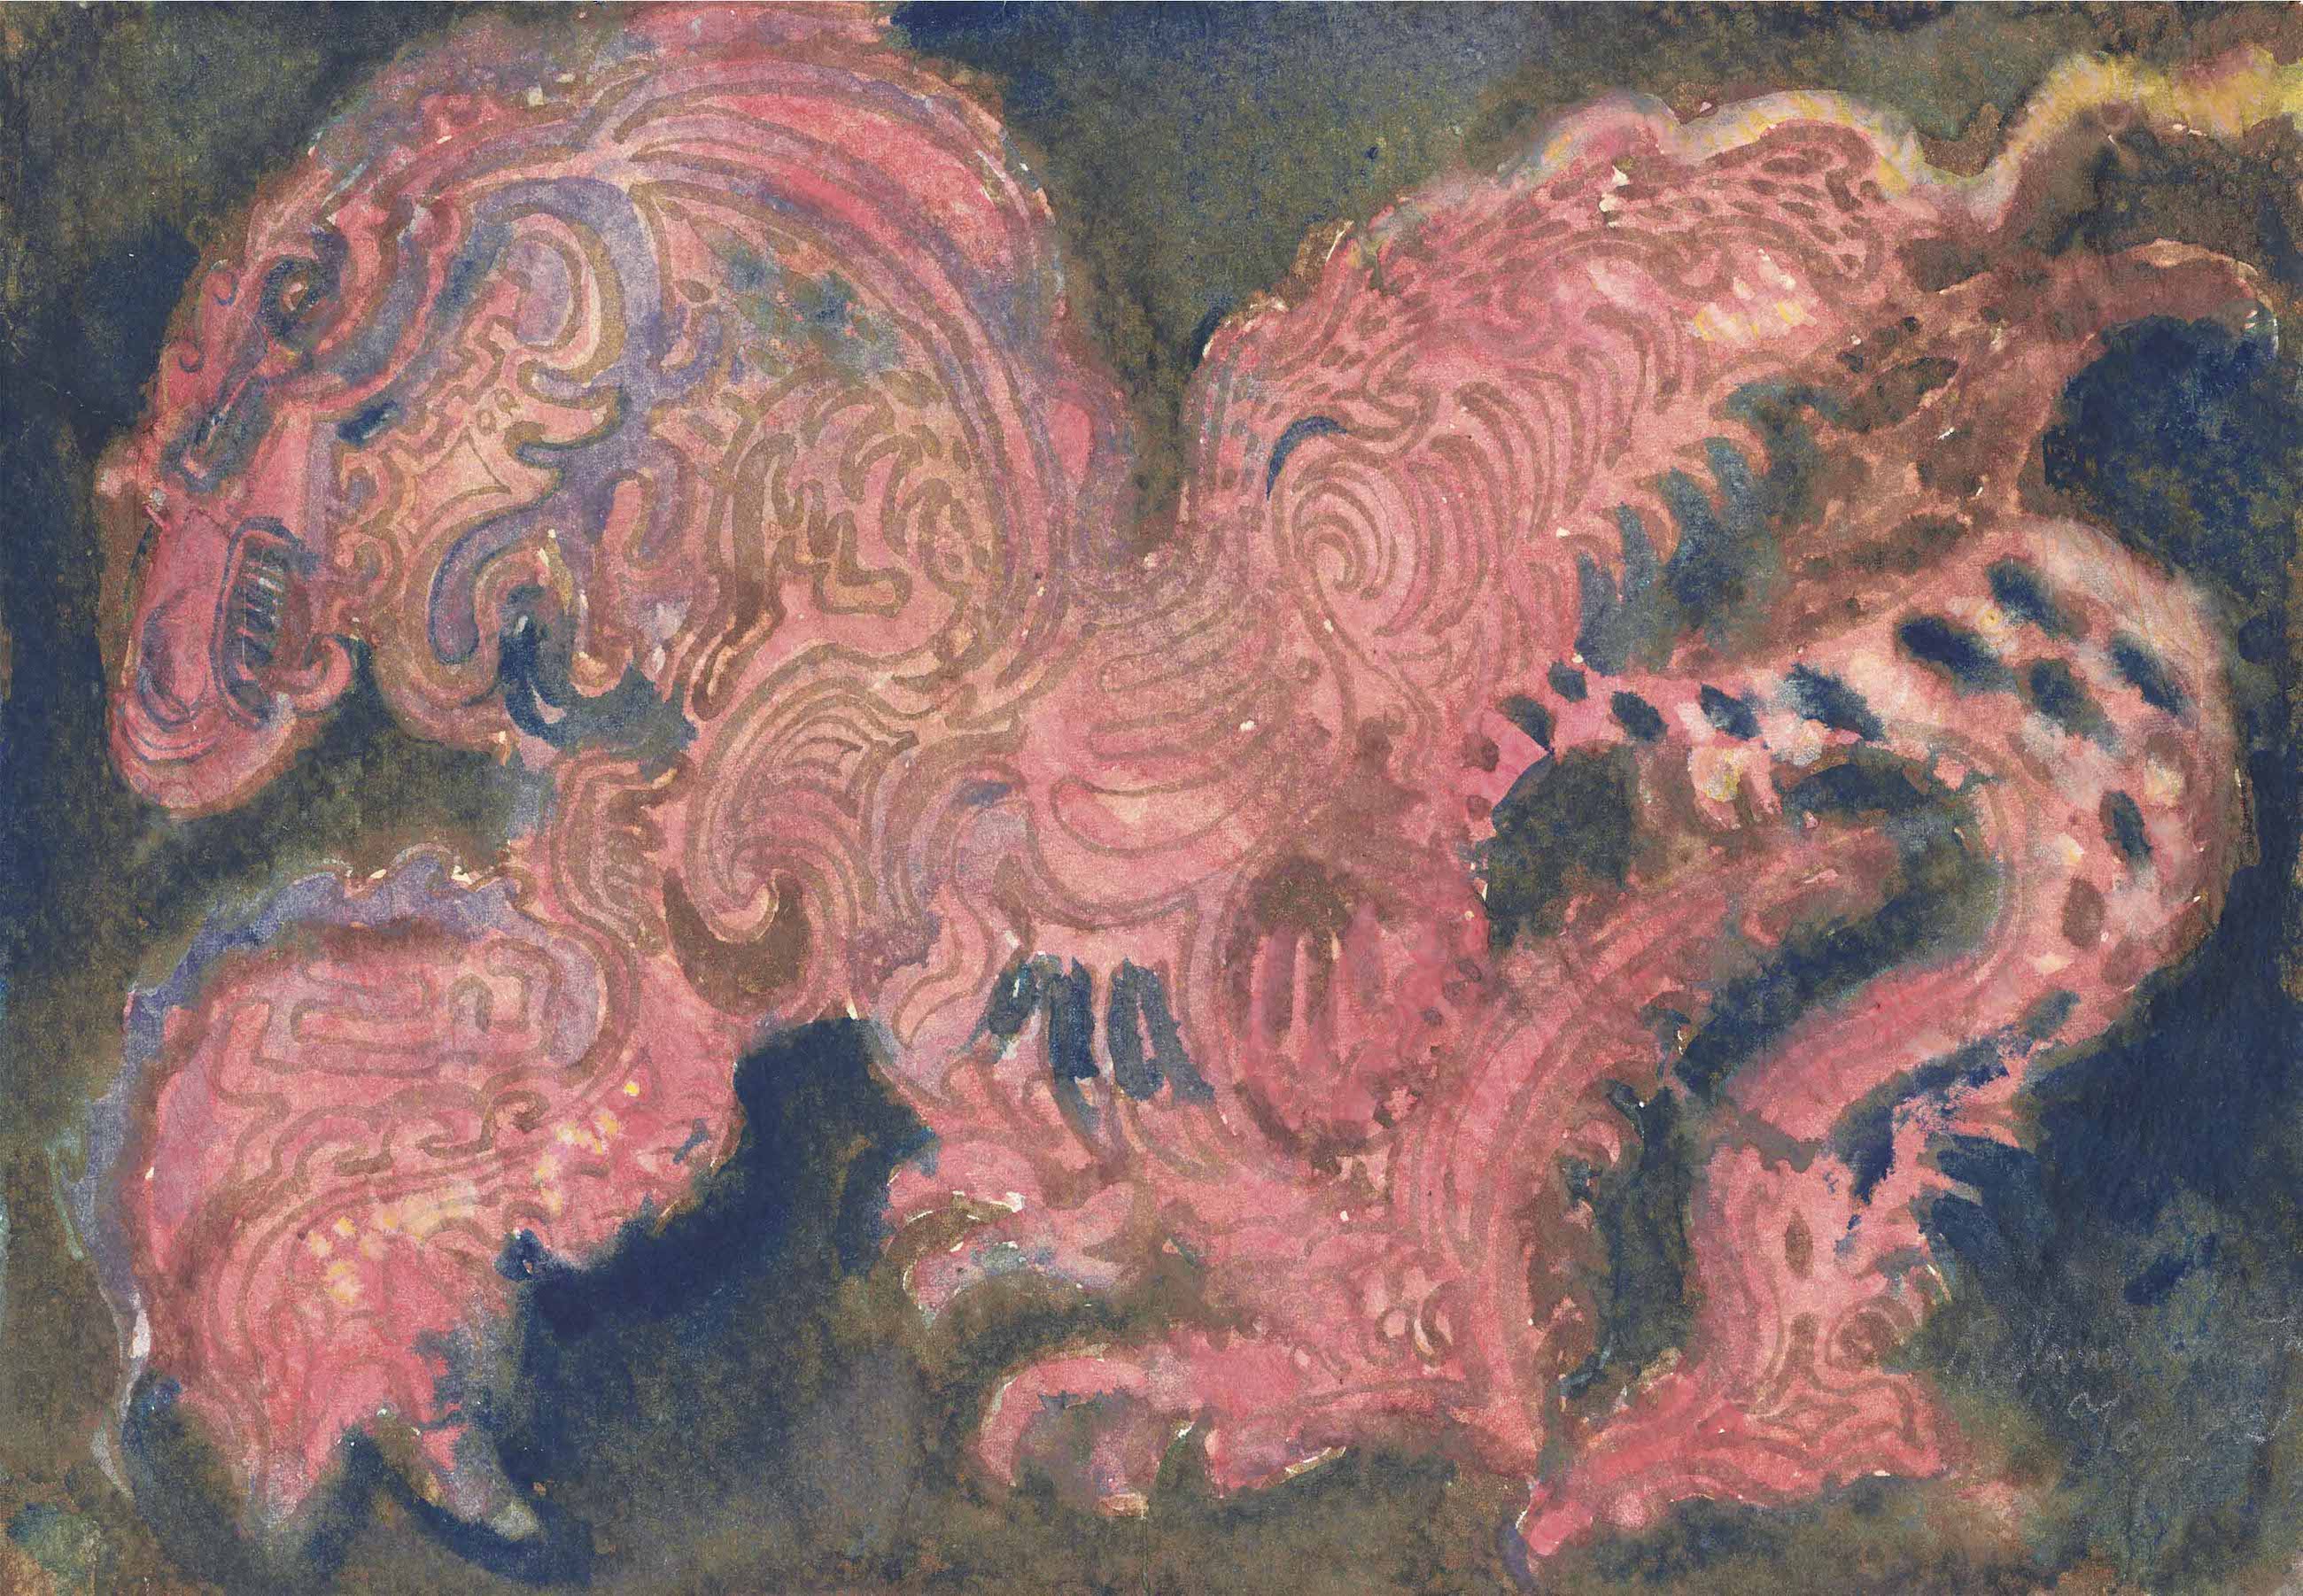 Untitled (Dragon) by Rabindranath Tagore - 1st half of 20th century - 20.7 x 29.5 cm private collection